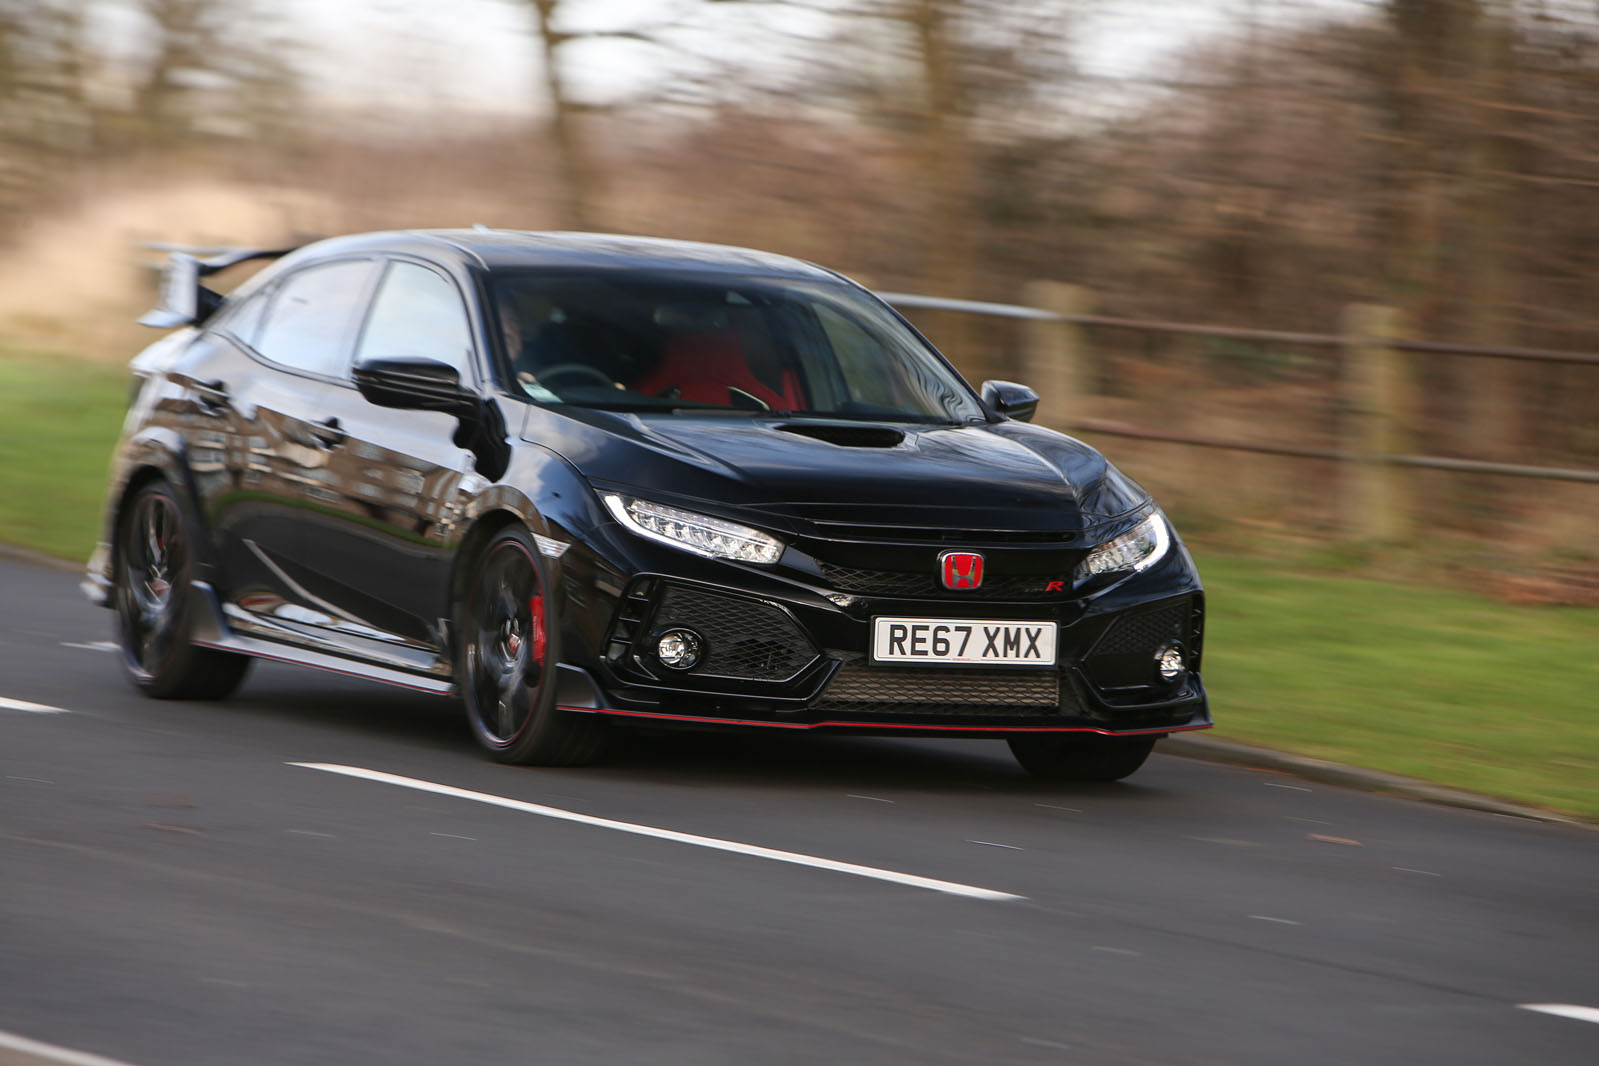 Honda Civic Type R Fk8 Long Term Review Six Months With The Fearsome Front Wheel Drive Hot Hatch Autocar